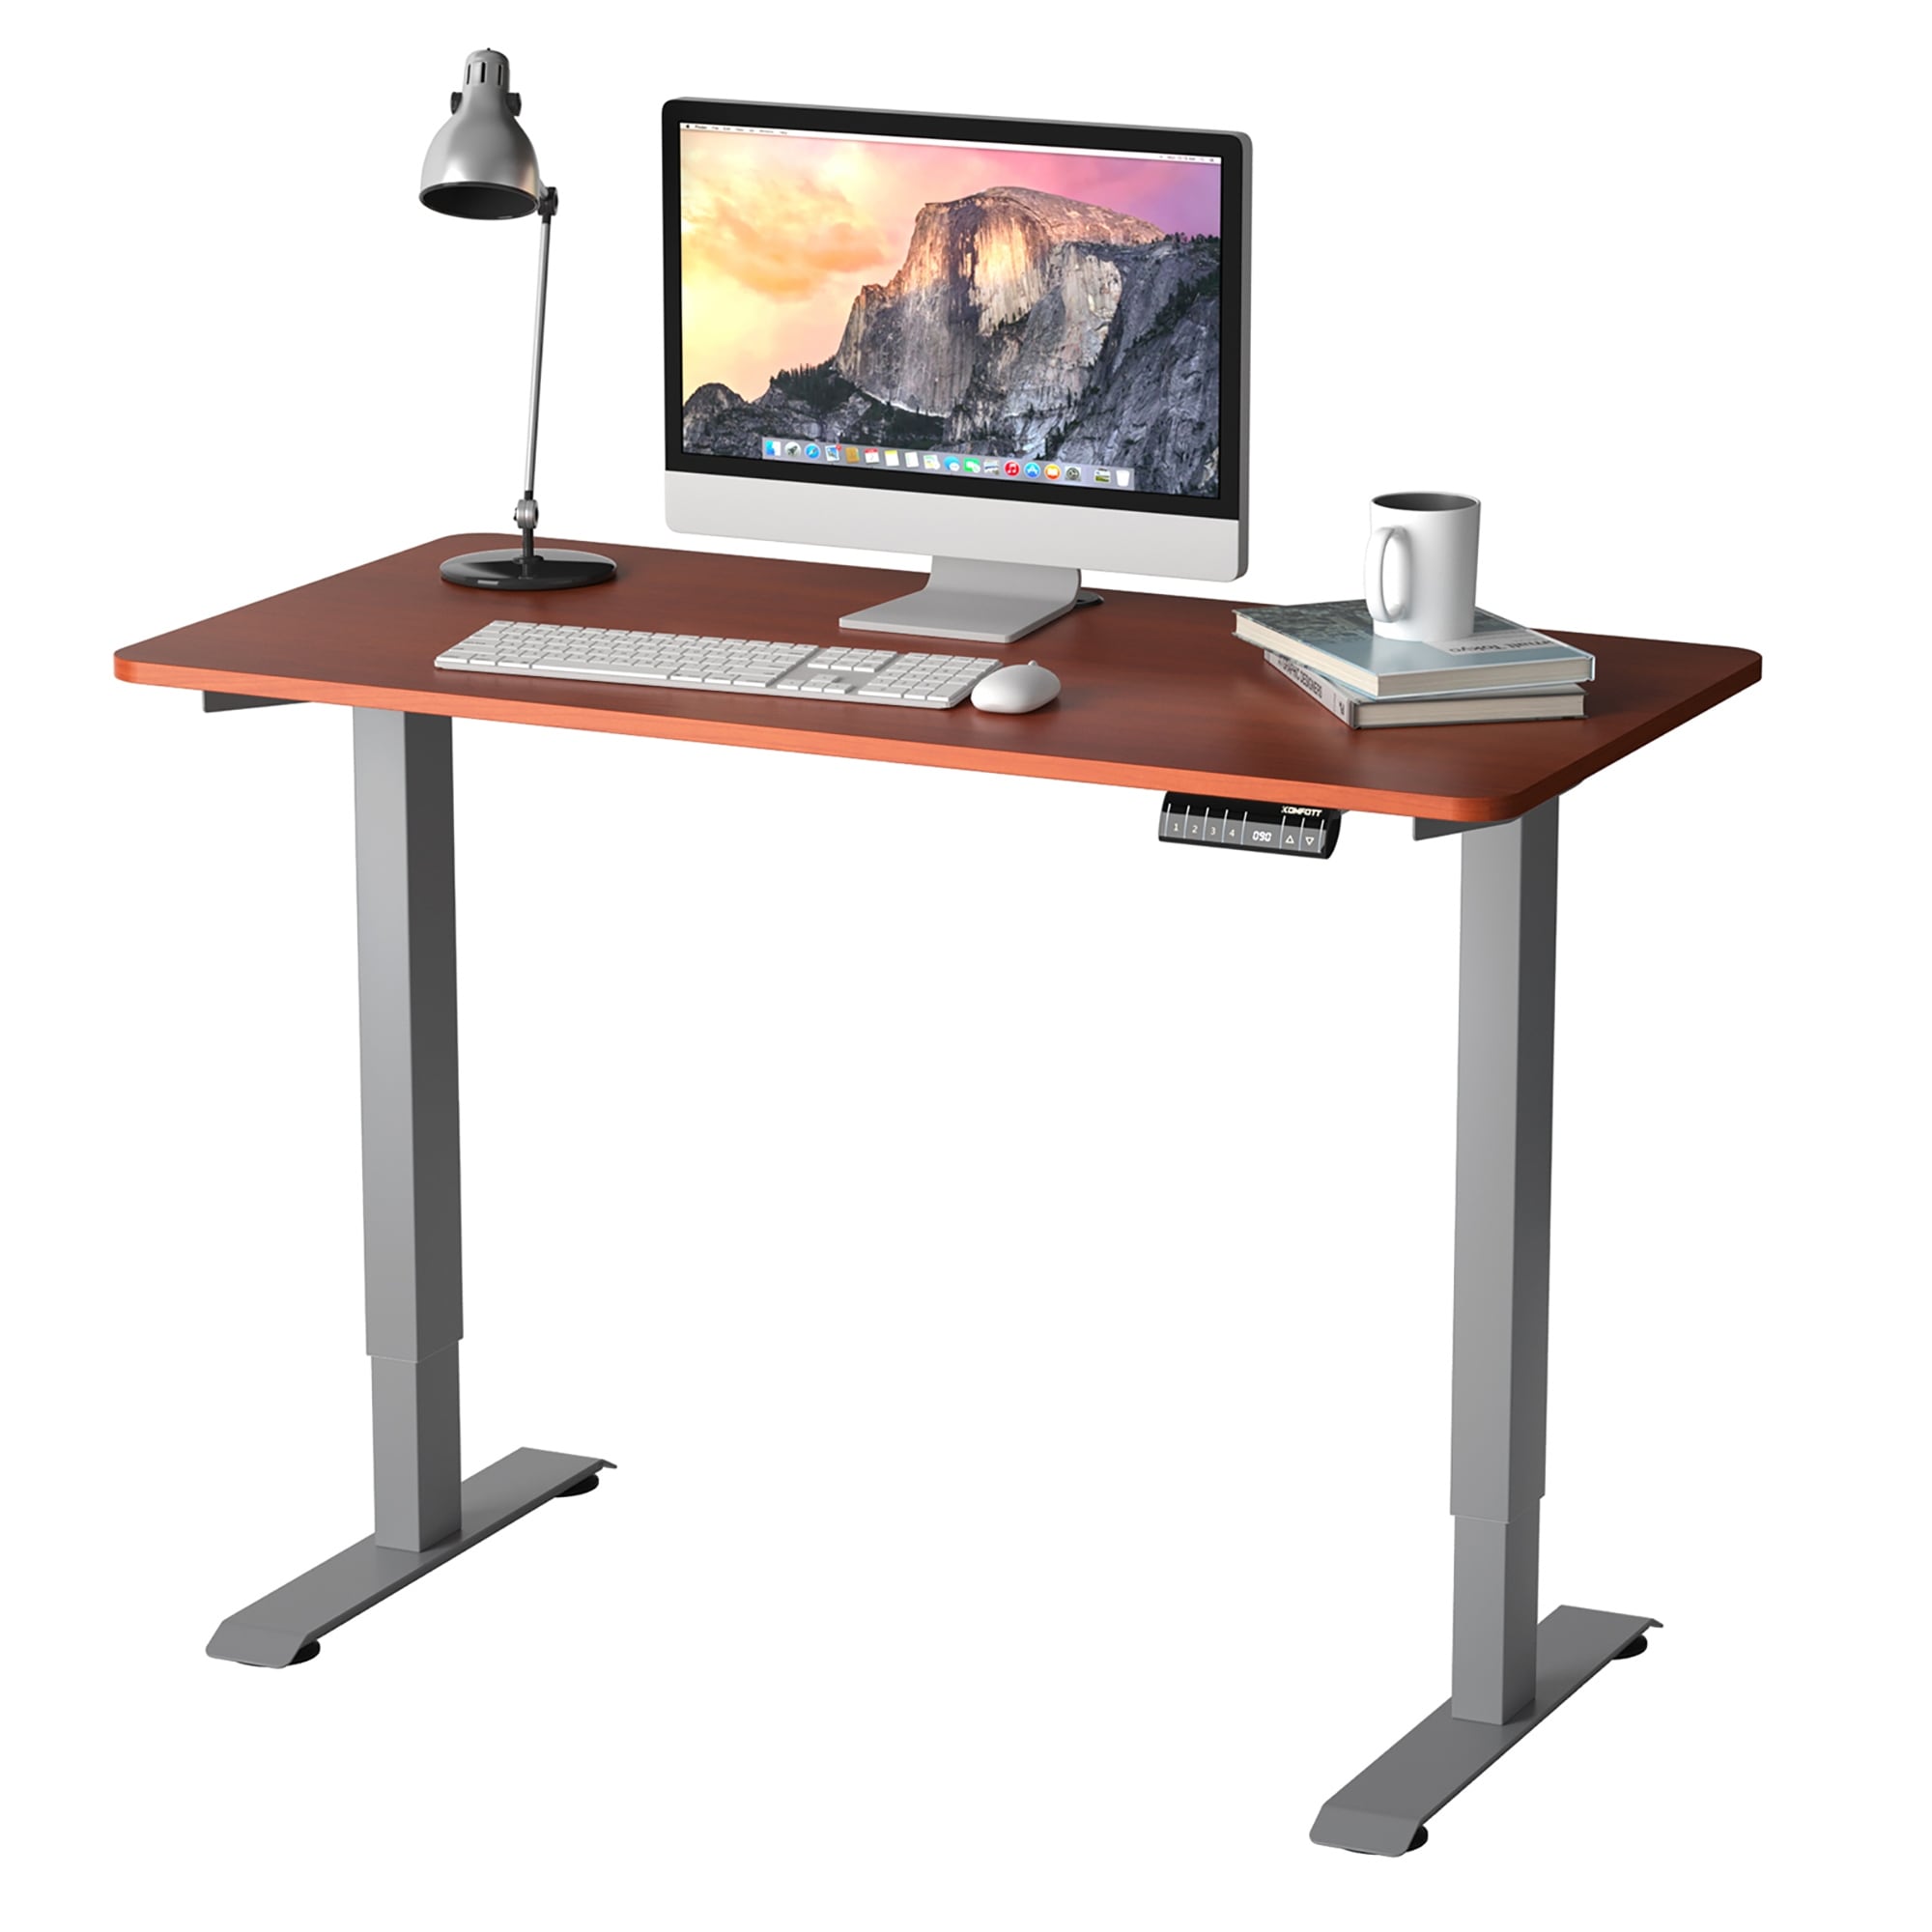 https://ak1.ostkcdn.com/images/products/is/images/direct/4d2d9b85e365e1409a017c4519fe56cc18e96992/Costway-Electric-Adjustable-Standing-Desk-Stand-up-Workstation.jpg